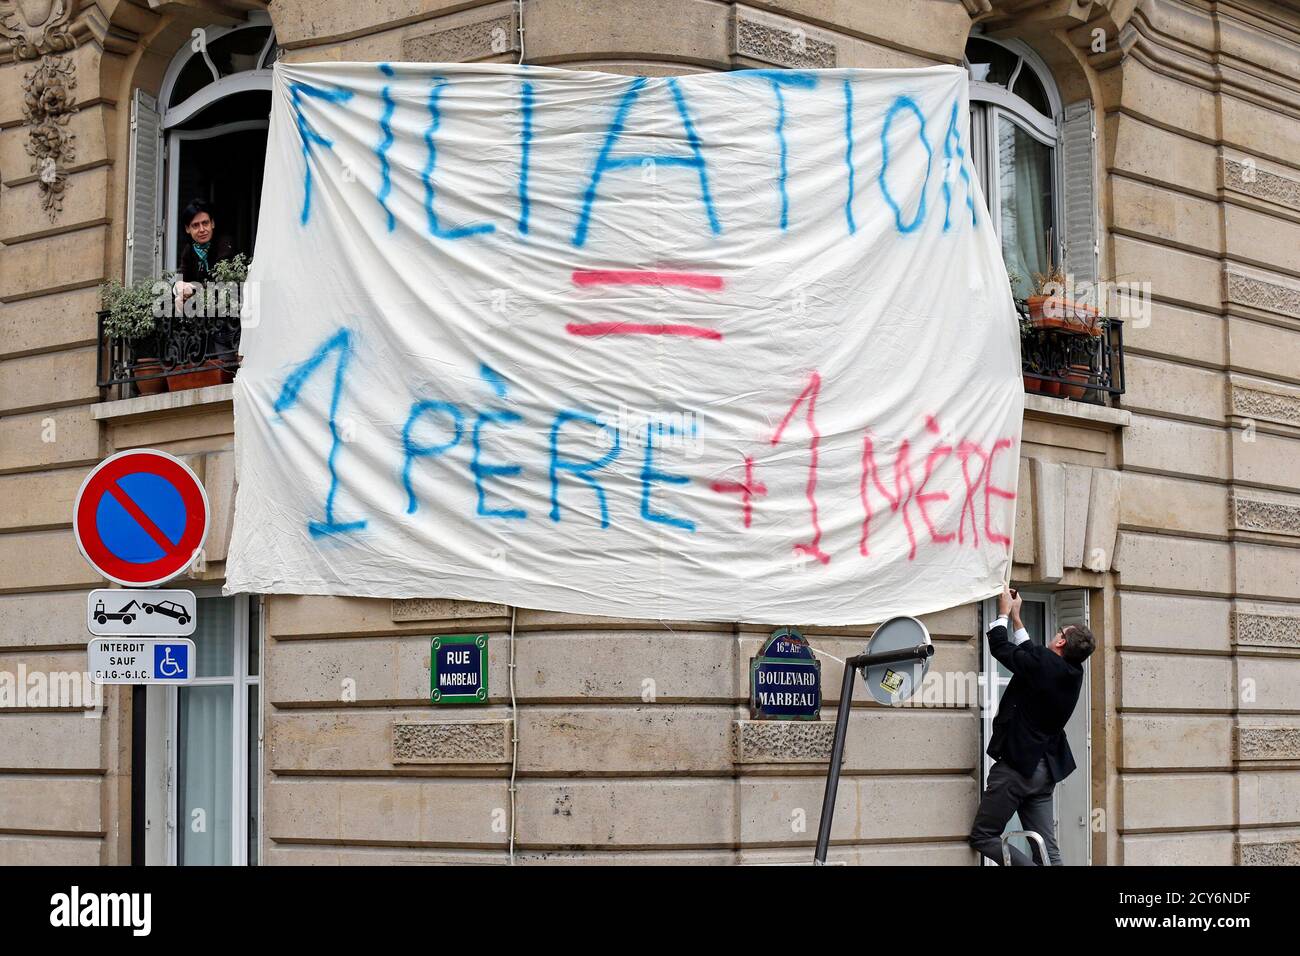 A demonstrator against gay marriage, adoption and procreation assistance hangs a banner on the streets of Paris, January 13, 2013. The banner reads: 'Filiation = 1 father + 1 mother'. Trains, buses and cars poured into Paris on Sunday bringing protesters from around France for a mass demonstration against gay marriage, a divisive reform President Francois Hollande has pledged to enact by June. REUTERS/Benoit Tessier (FRANCE - Tags: SOCIETY POLITICS CIVIL UNREST) Stock Photo